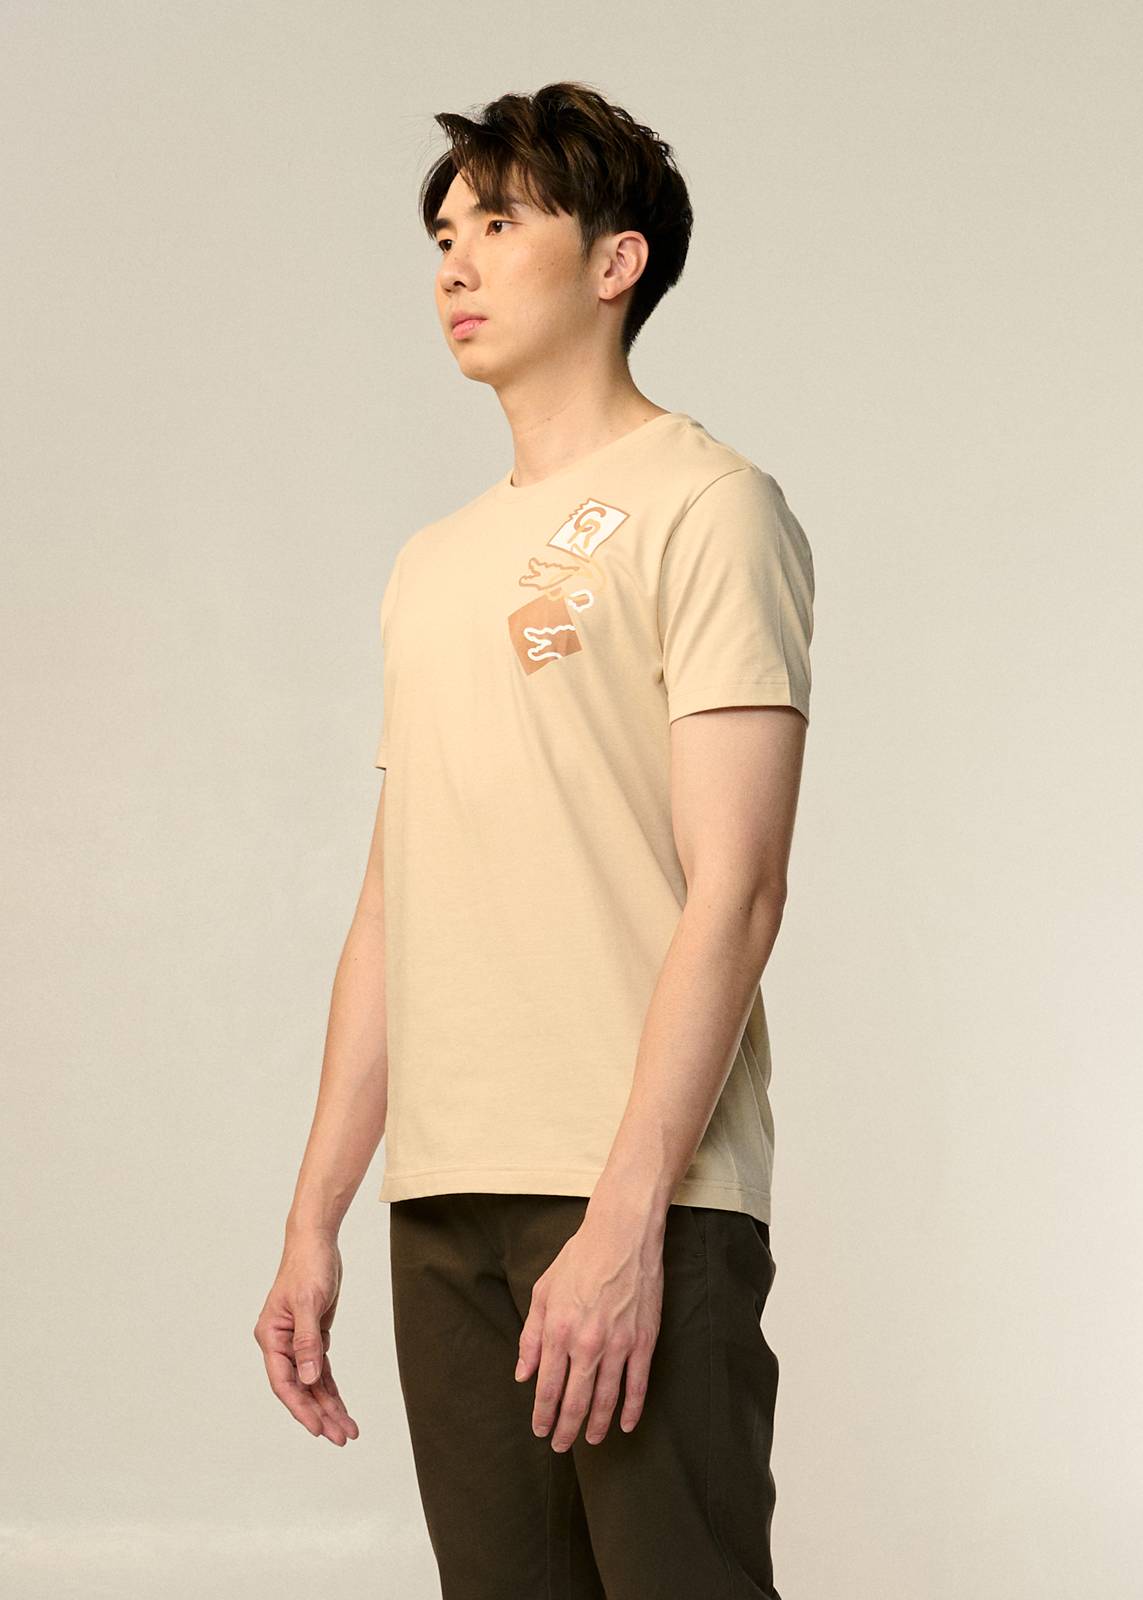 ENHANCED NEUTRALS CUSTOM FIT CREW NECK T-SHIRT WITH GRAPHIC PRINT